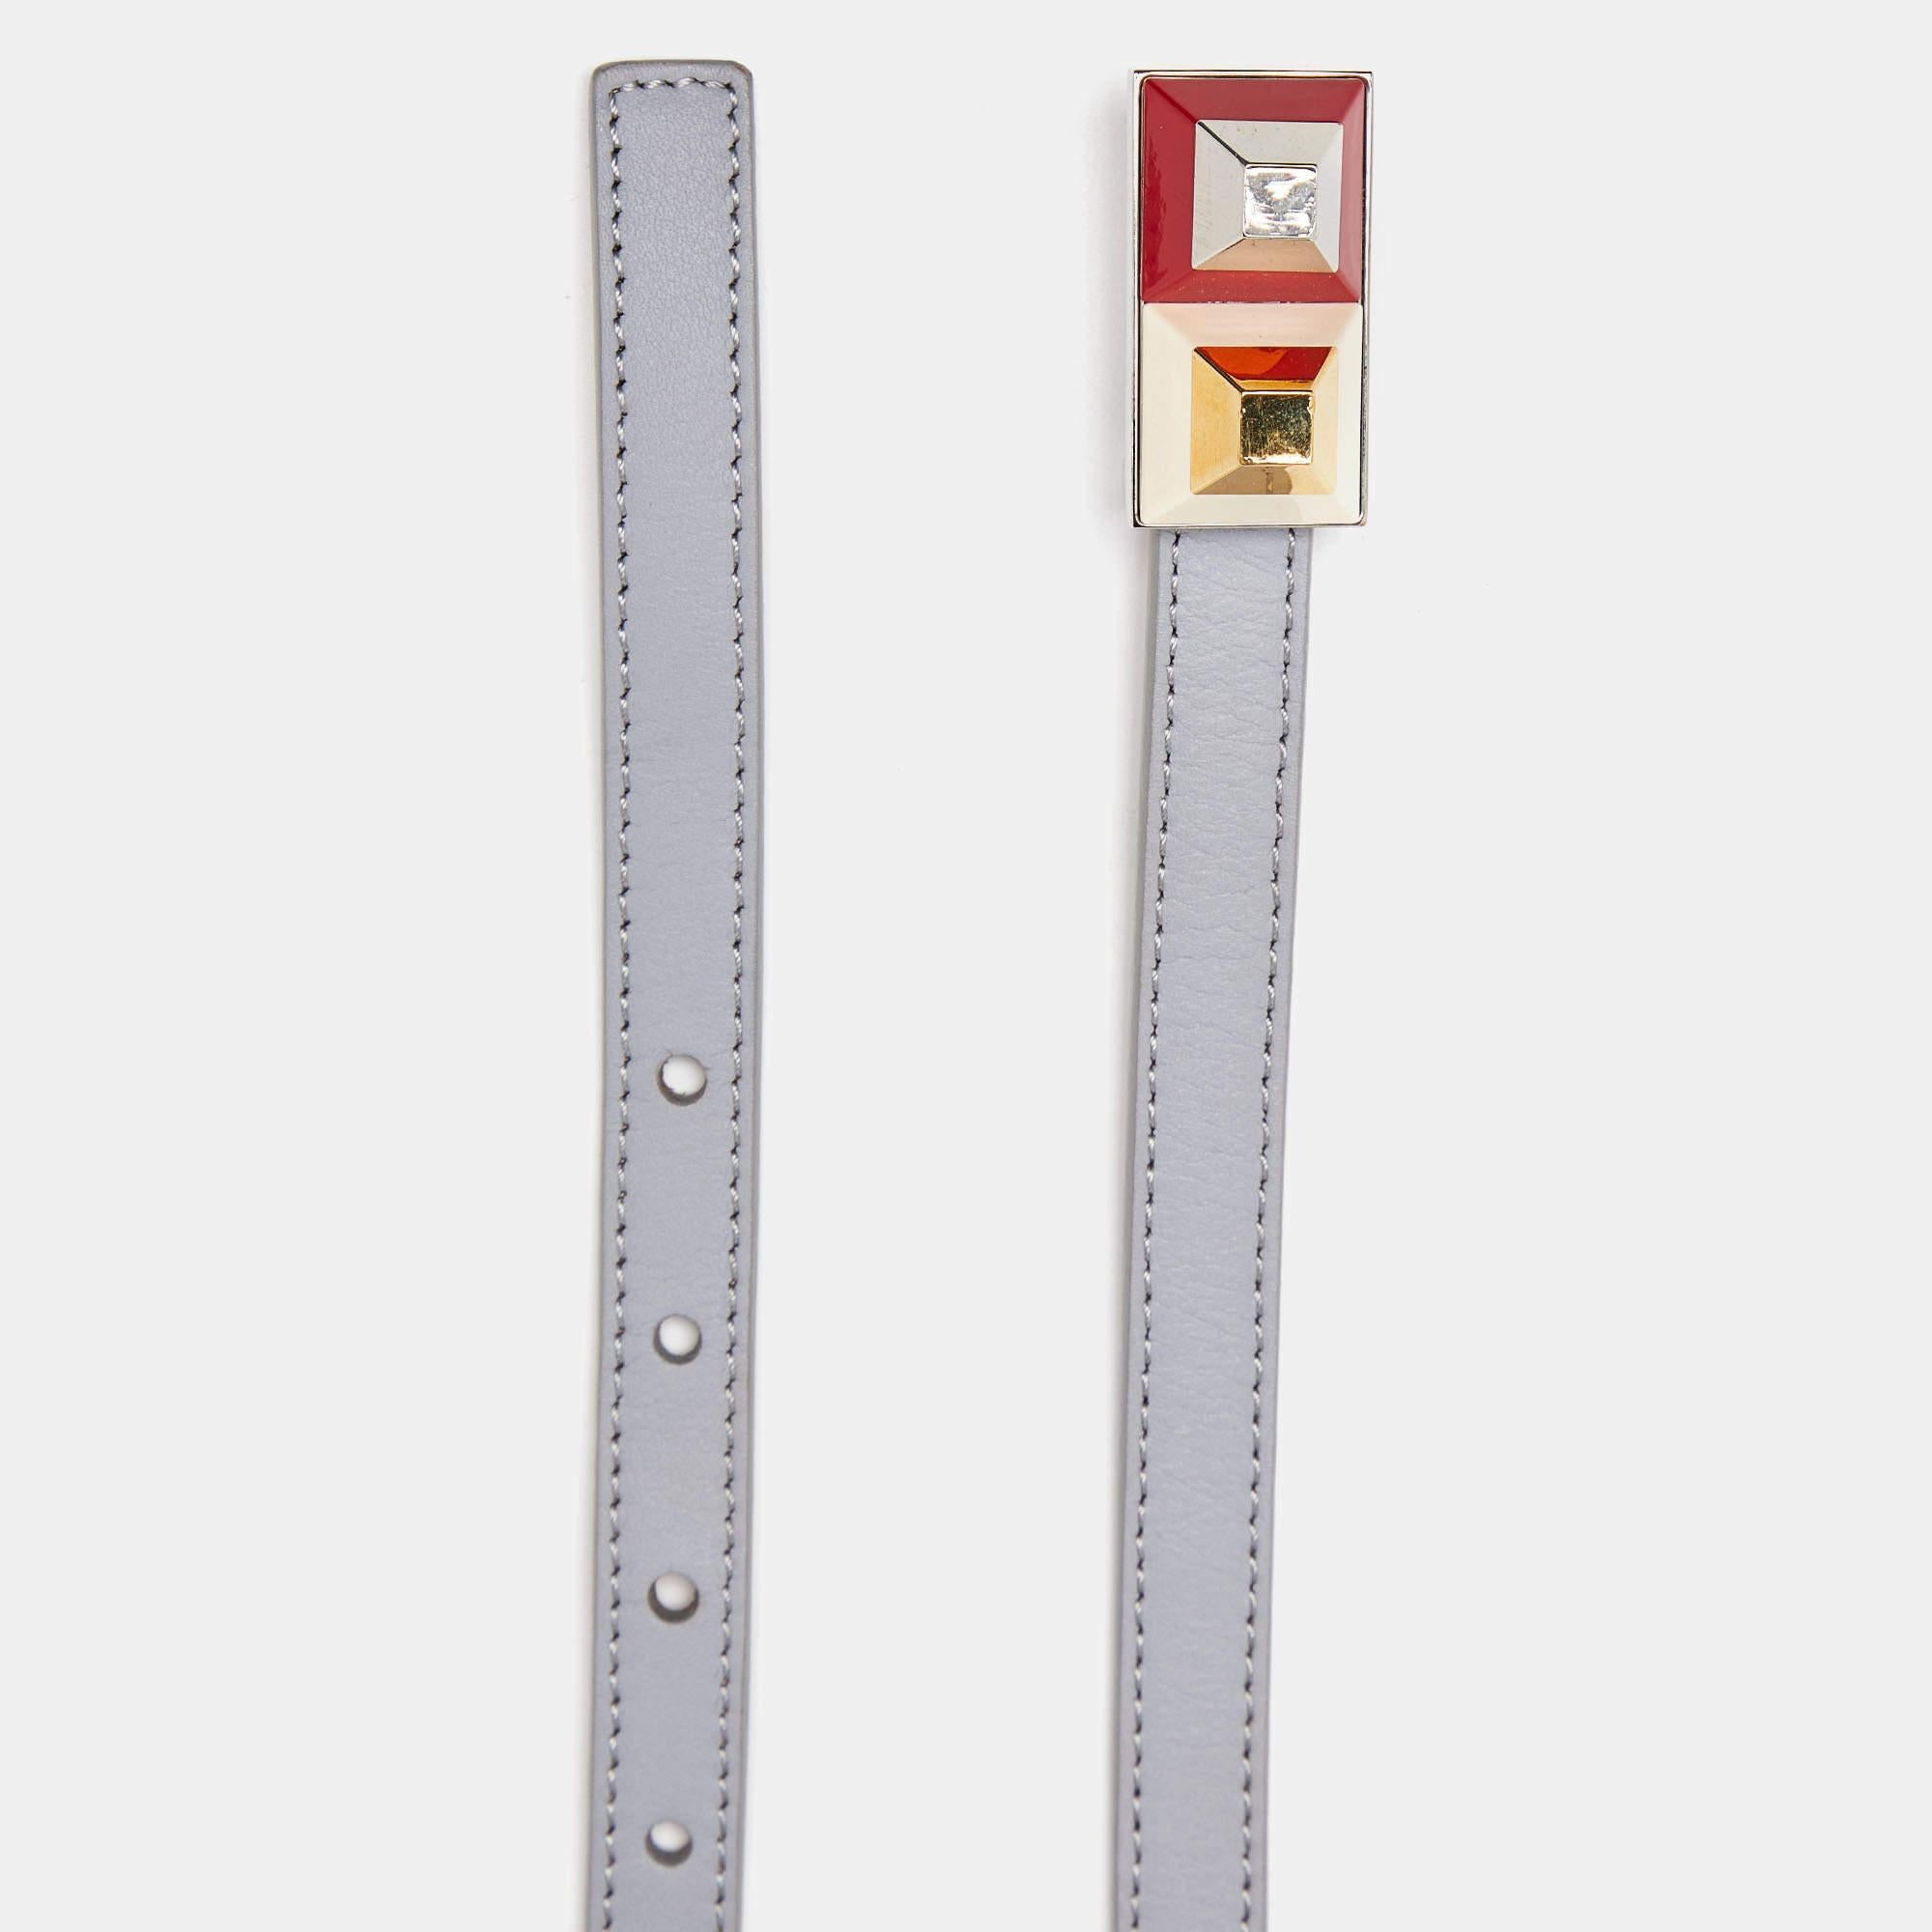 Pull together a multitude of stylish looks with Fendi's grey-colored leather belt. It features a polished gold-tone & silver-tone metal accents. Grab it now!

Includes: Branded Dustabag

